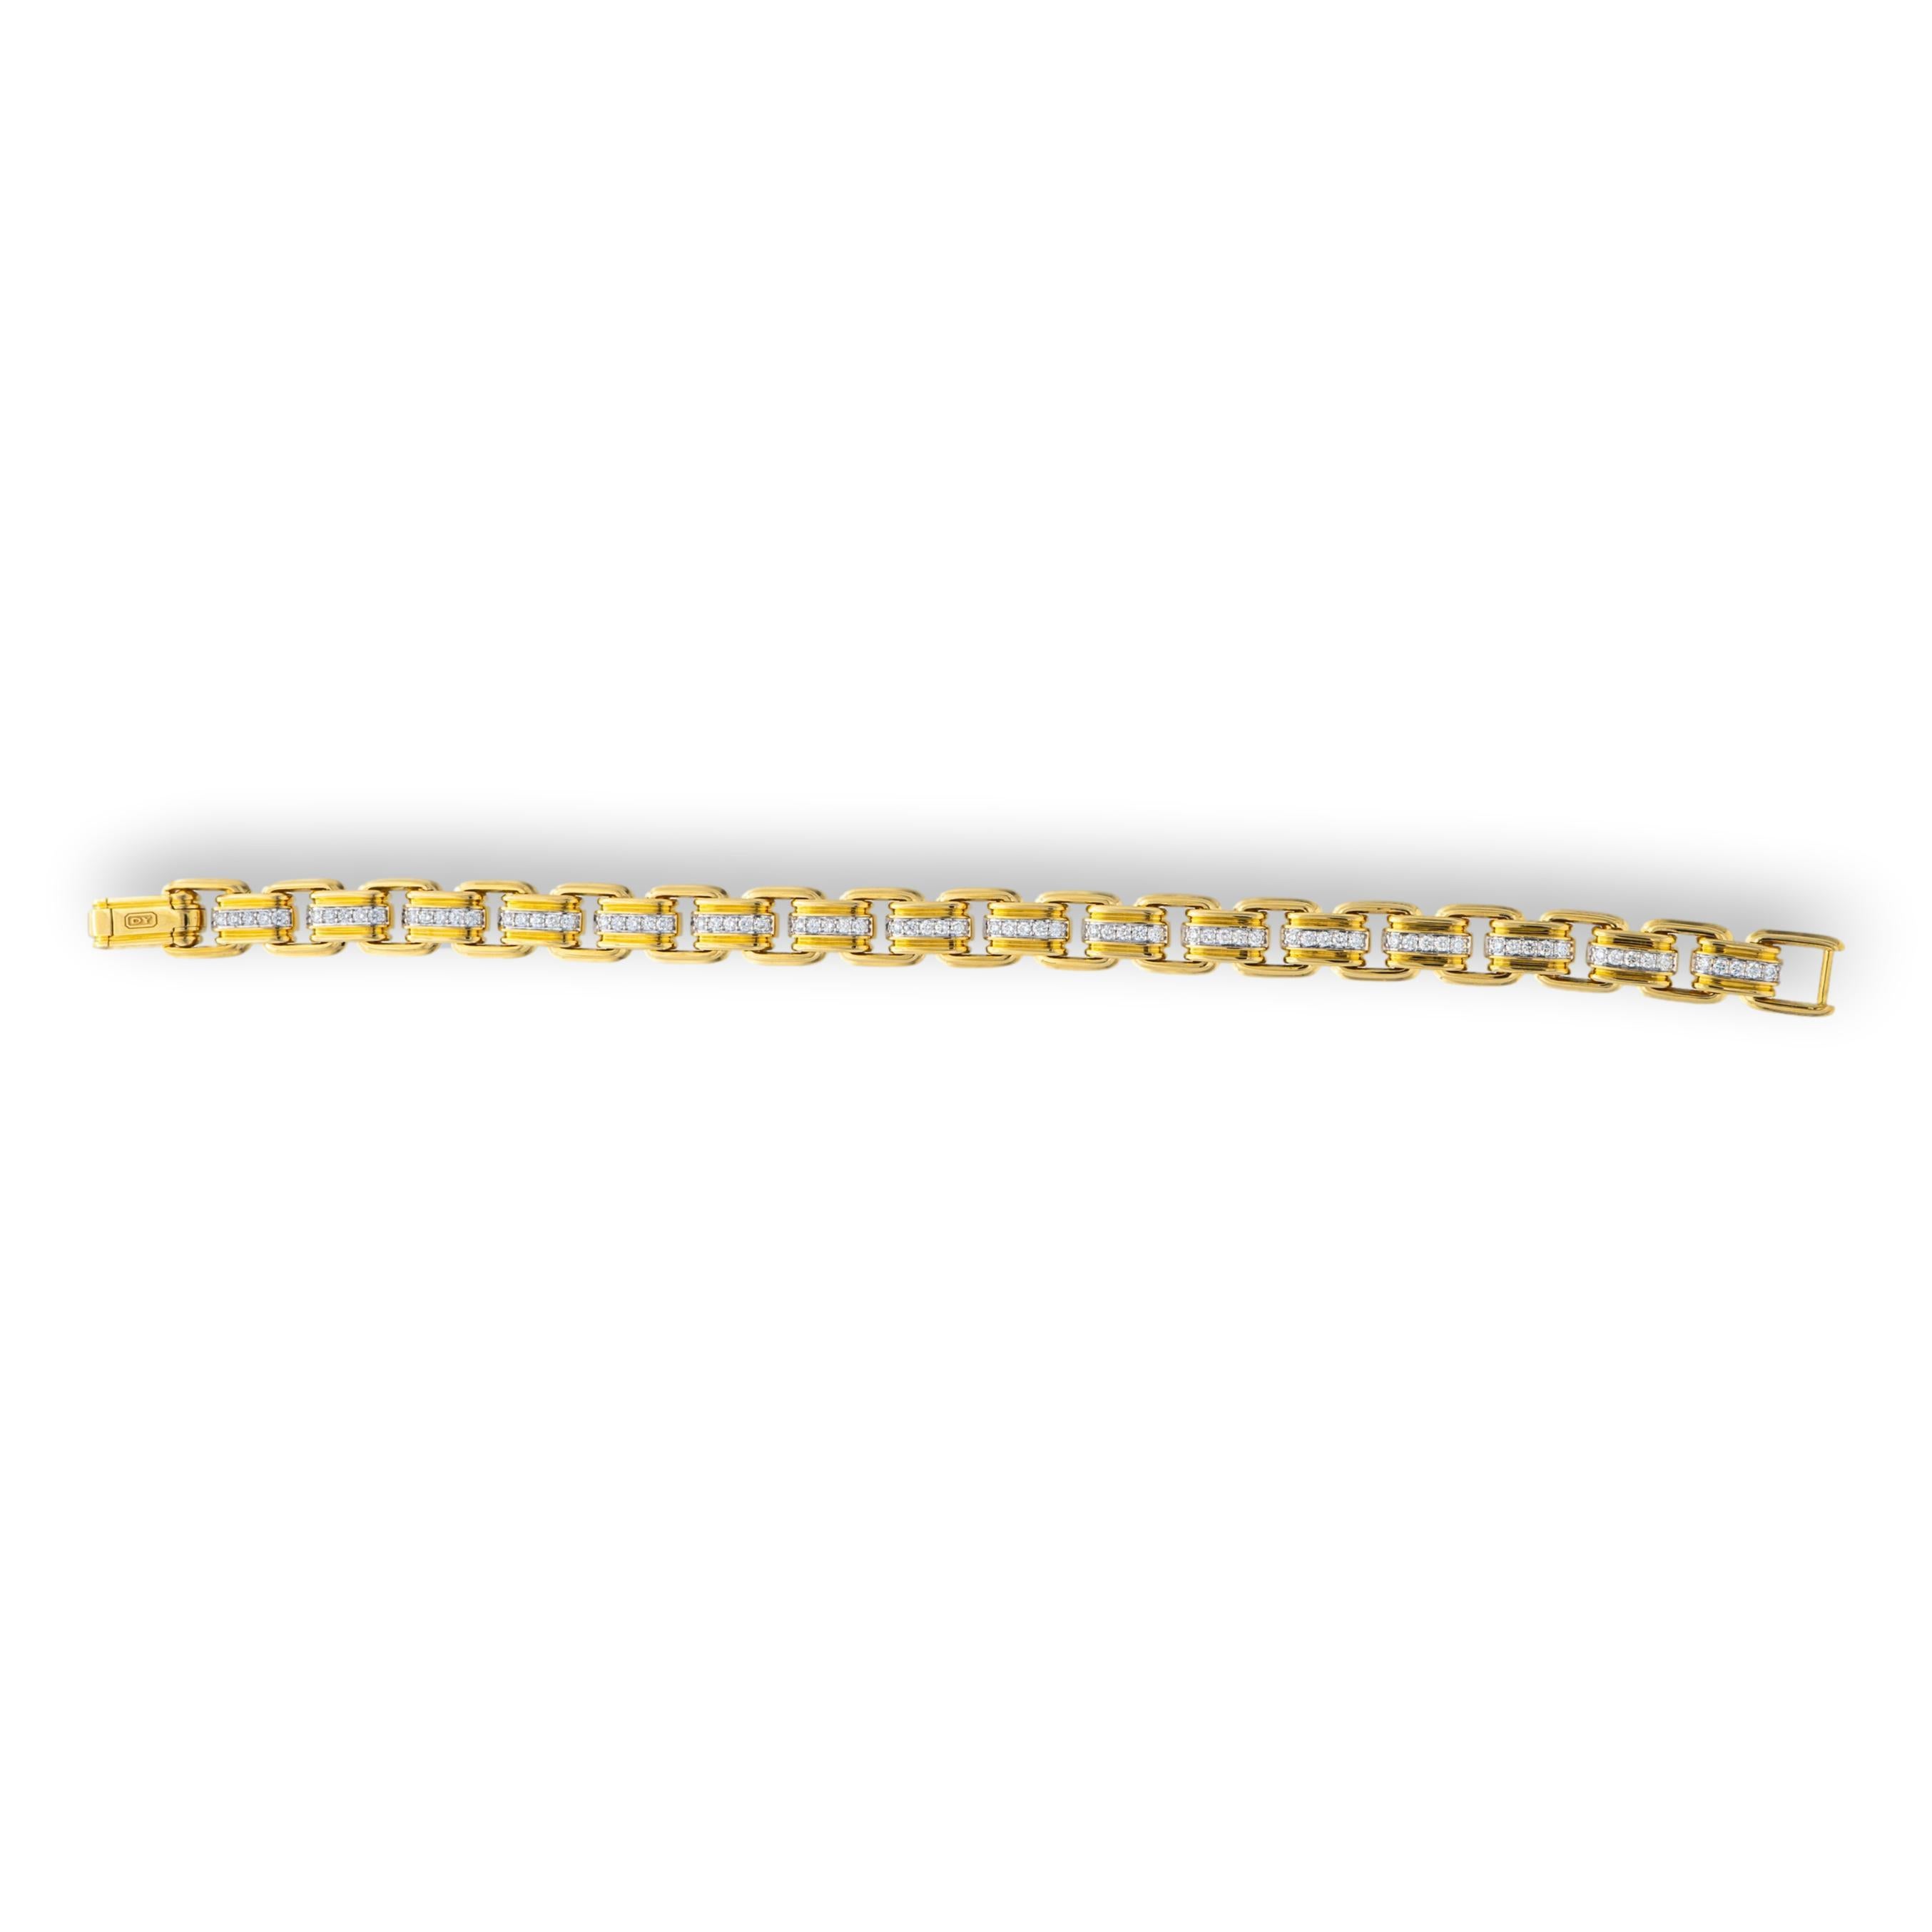 David Yurman Men's bracelet from the Deco collection finely crafted in 18 karat yellow gold featuring pave set round brilliant cut diamond link sections in white gold settings weighing 1.34 carats total weight in a chain link design measuring 8 